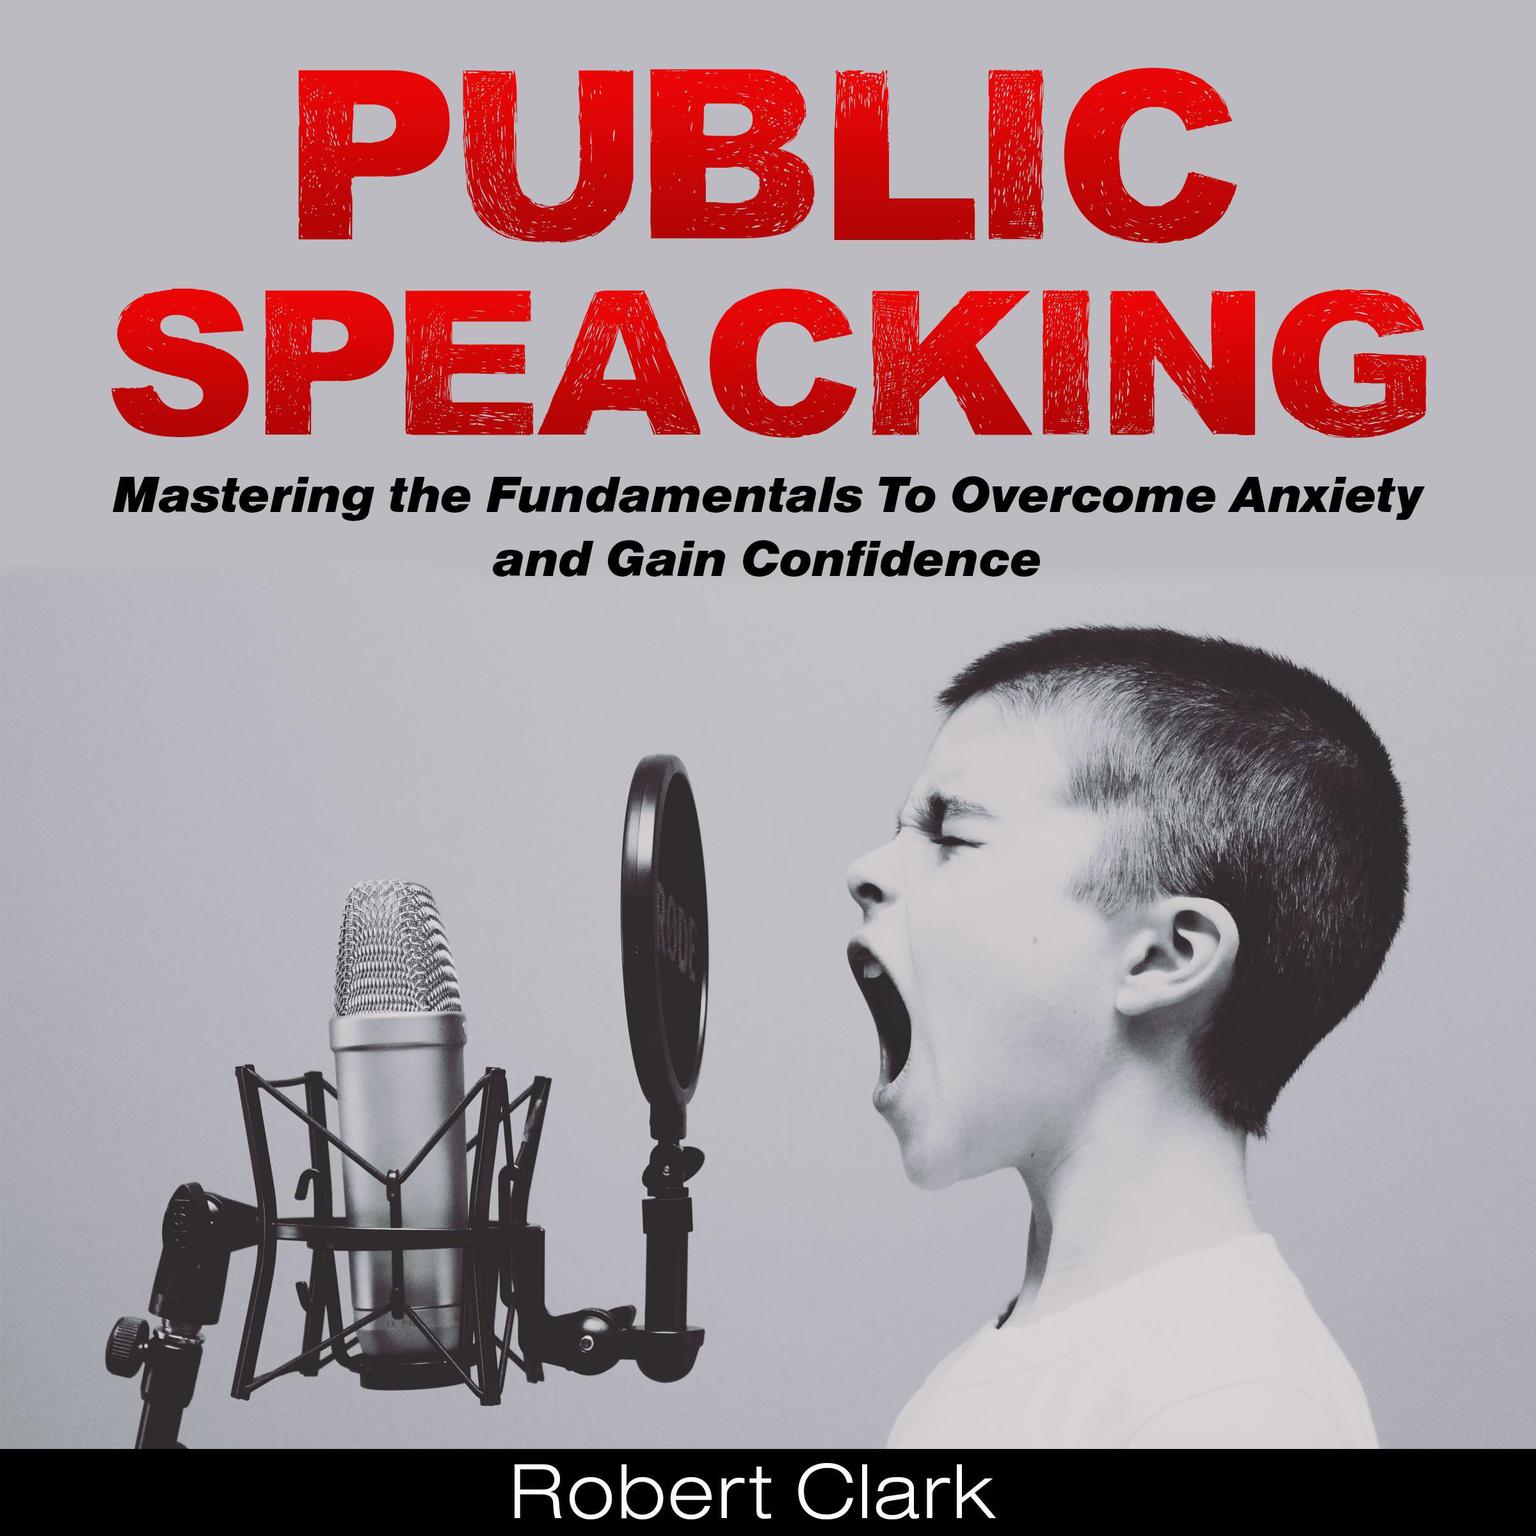 Public Speaking: Mastering the Fundamentals To Overcome Anxiety and Gain Confidence Audiobook, by Robert Clark